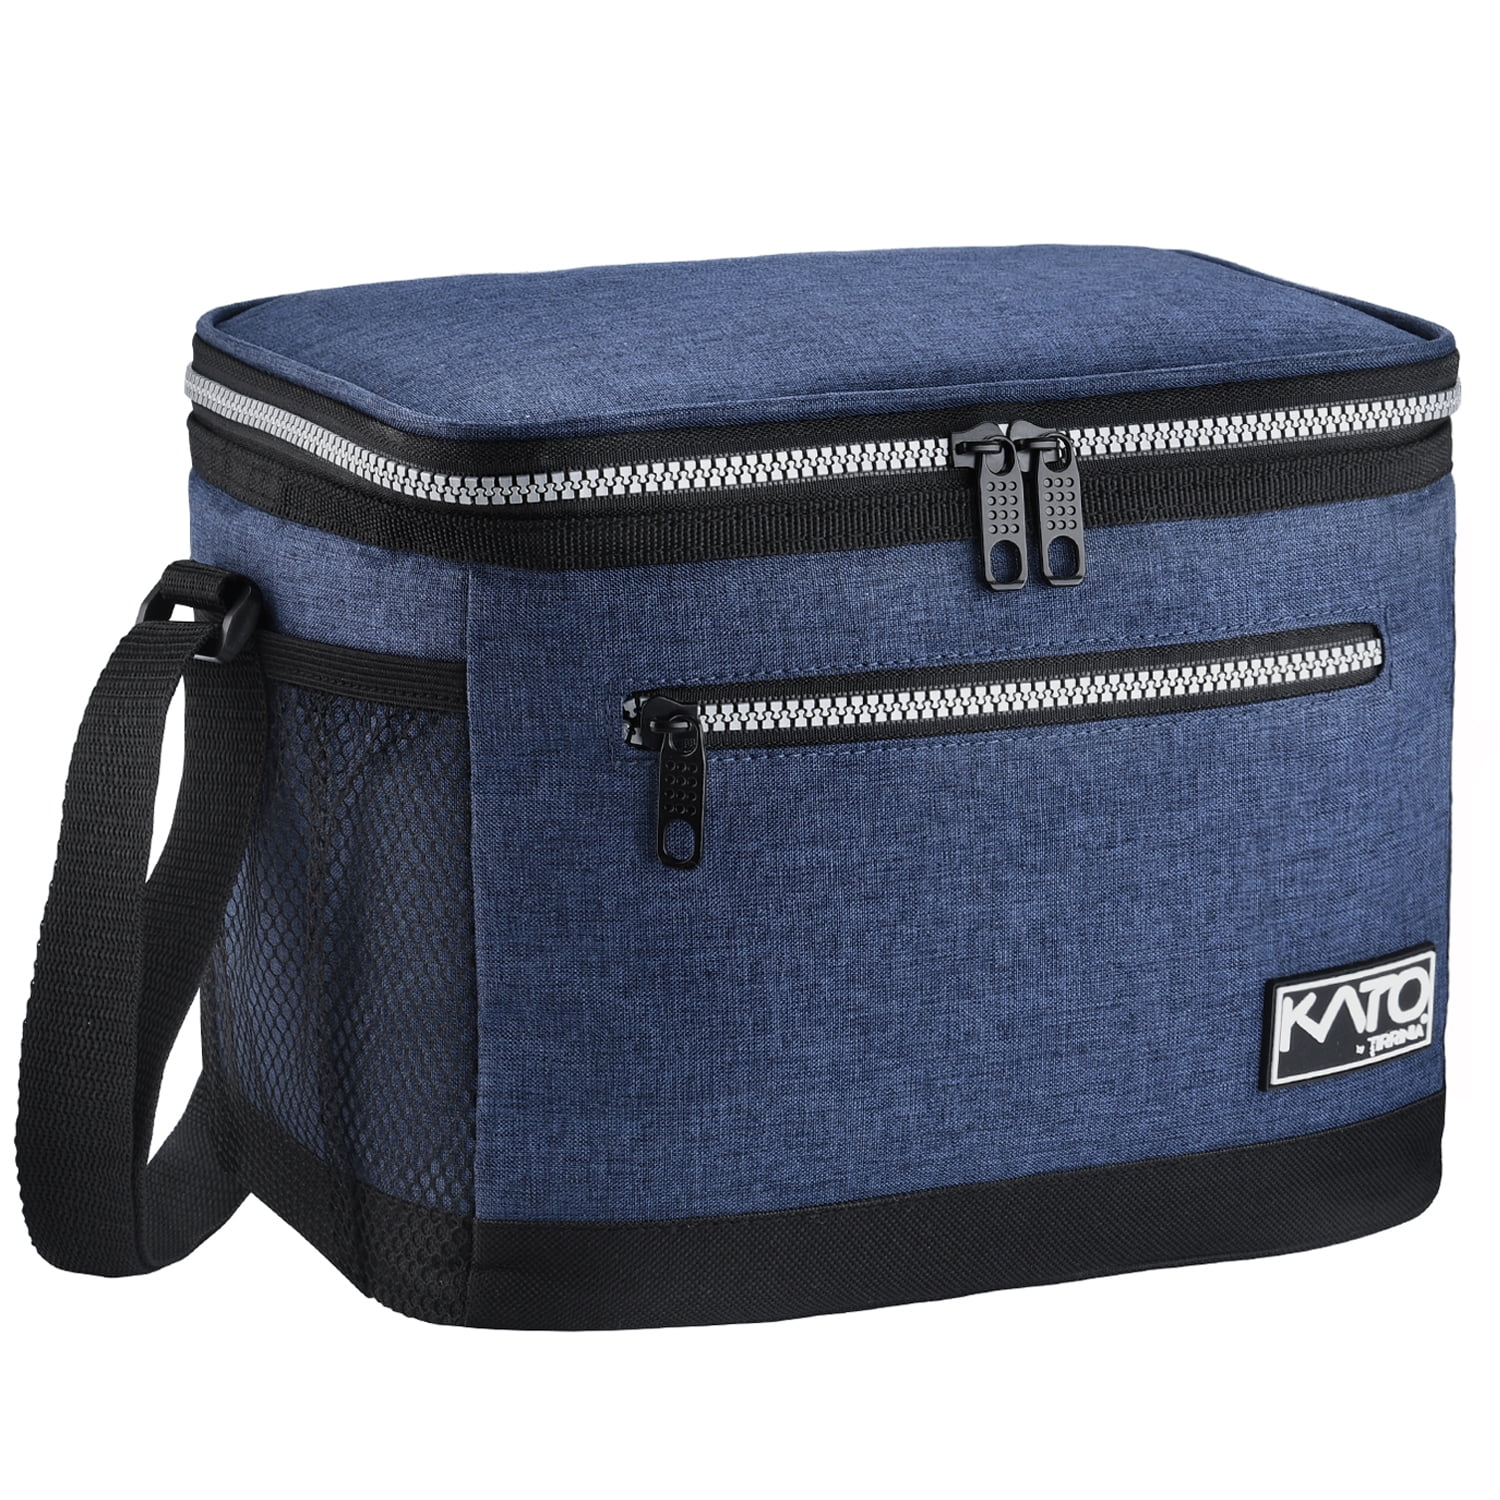 Lunch Bag for Women Leak-proof Small Cooler Bags Insulated for Men Work Picnic Hiking Beach Fishing Navy Cartoon Shark Lunch Box